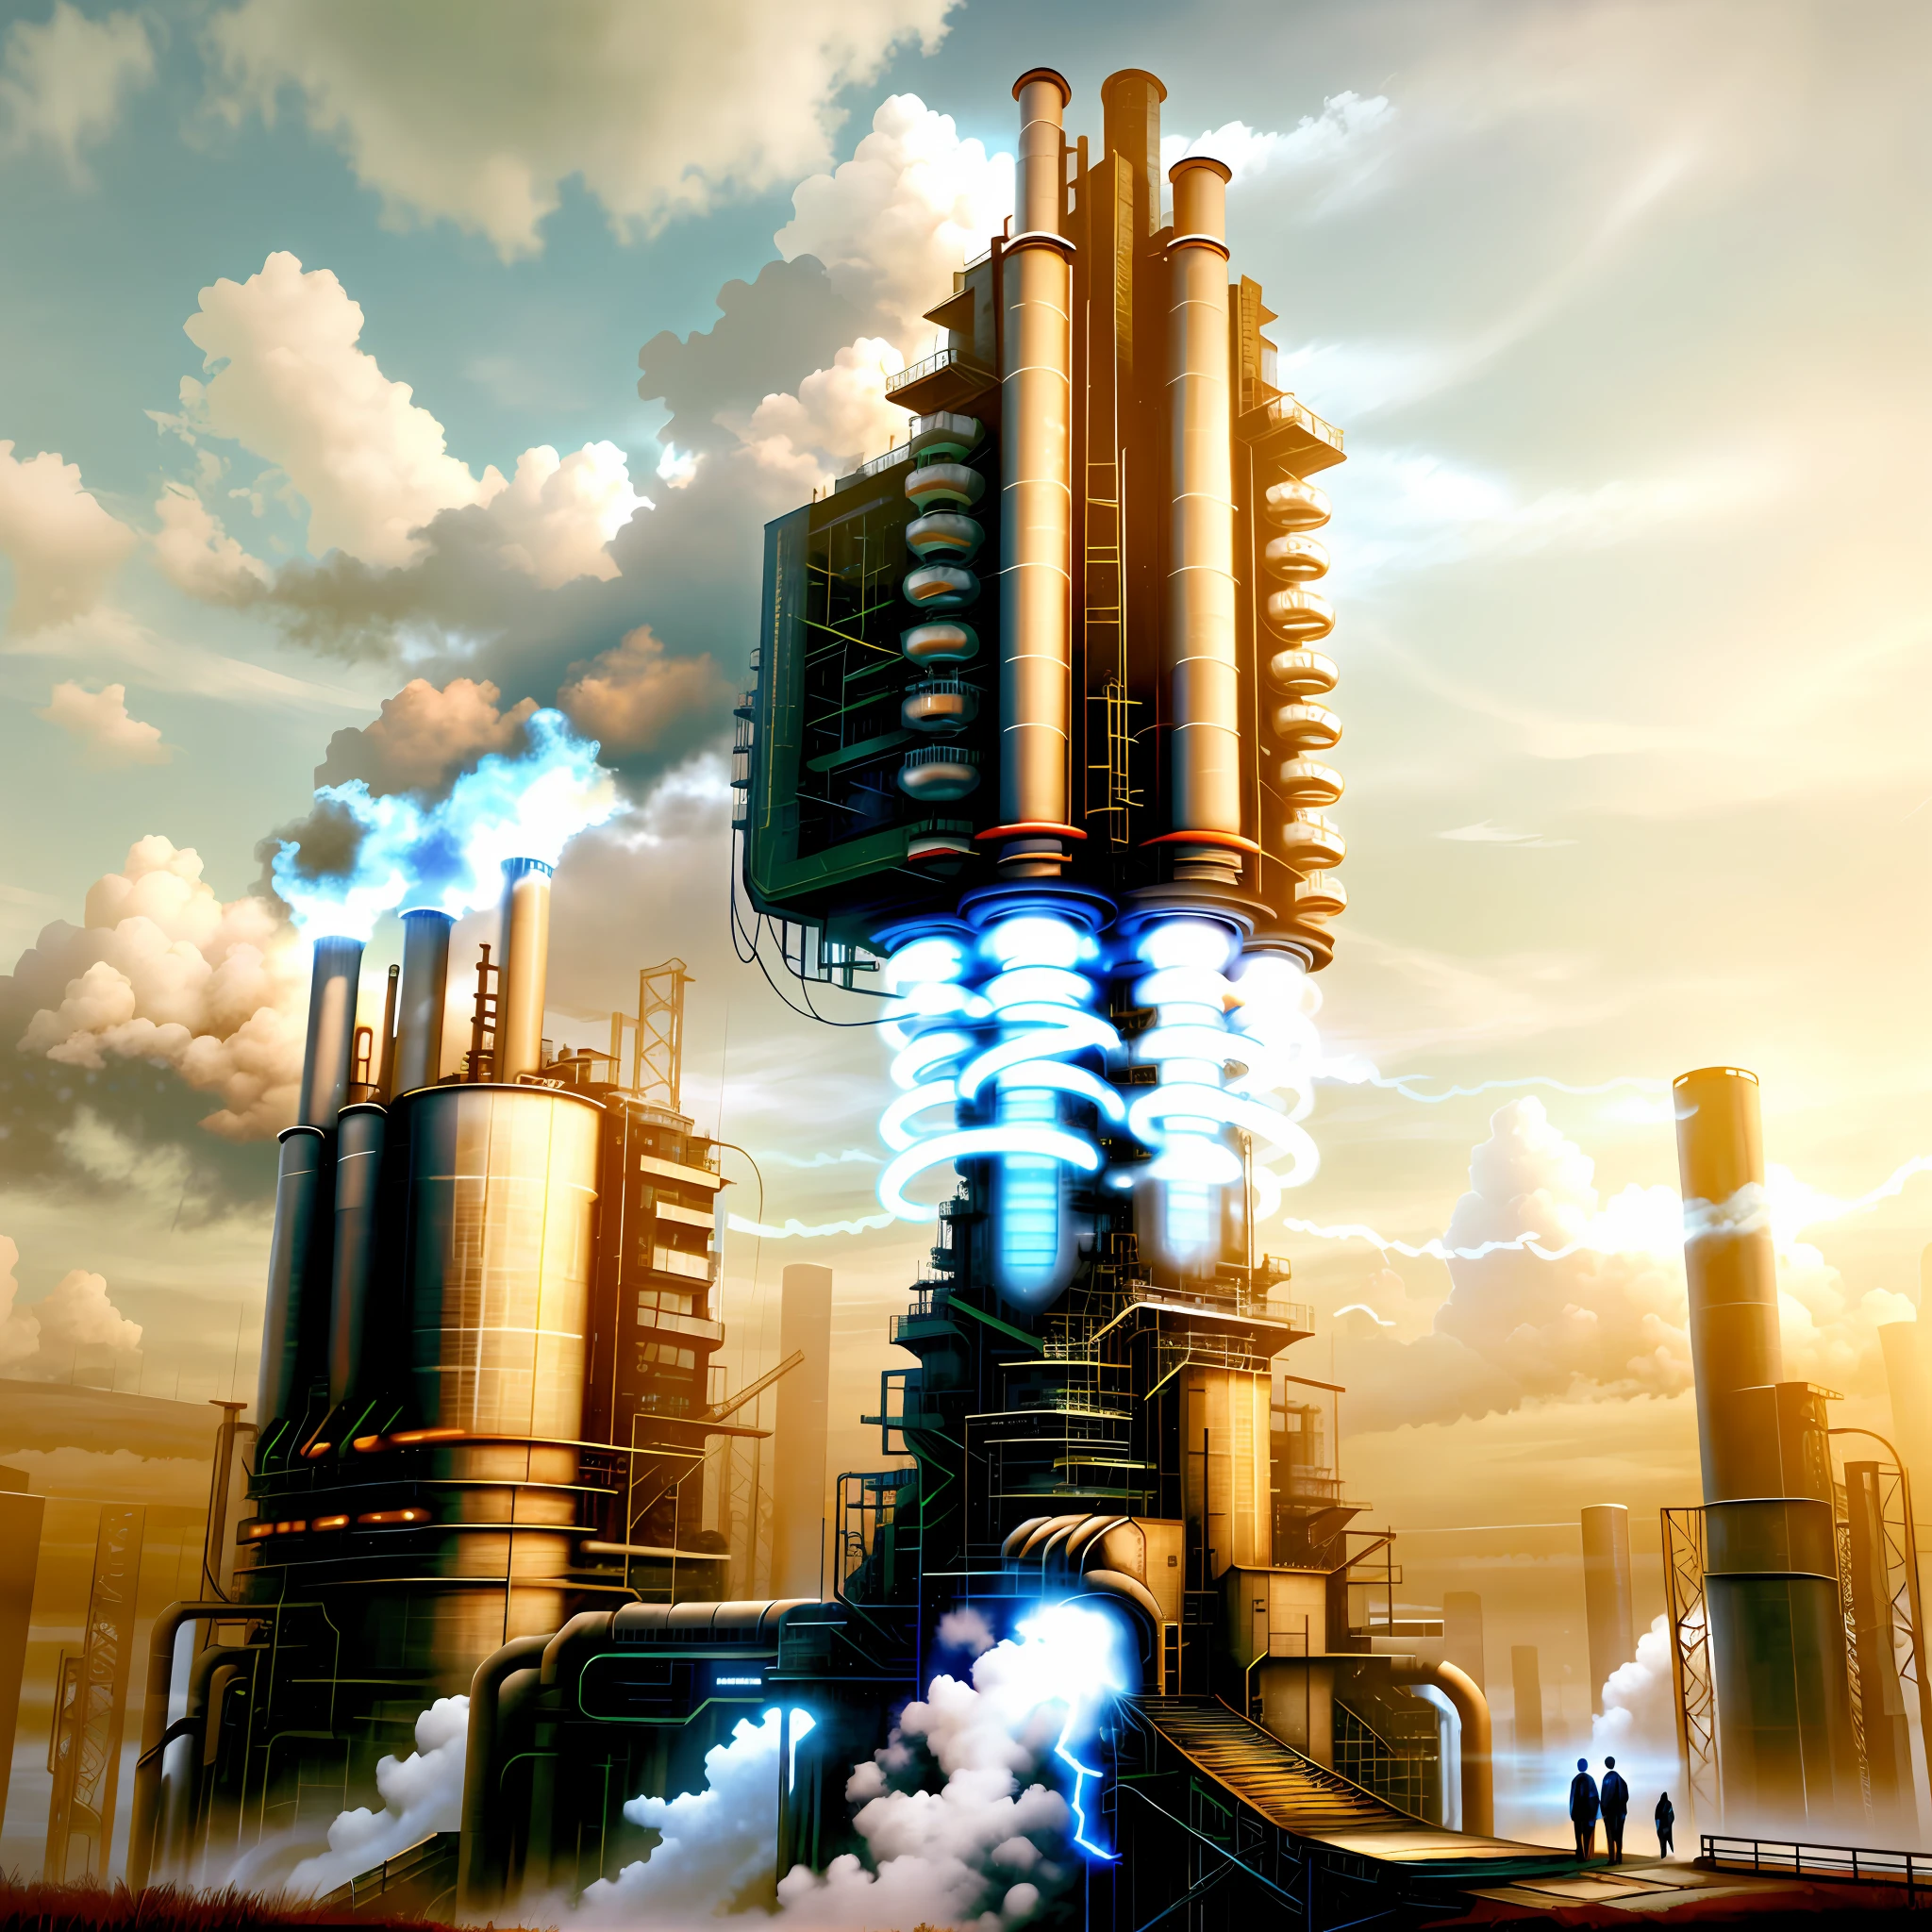 Super futuristic factory, with people entering sad on the left side and leaving on the right side jumping with joy with a beautiful landscape of nature in the background